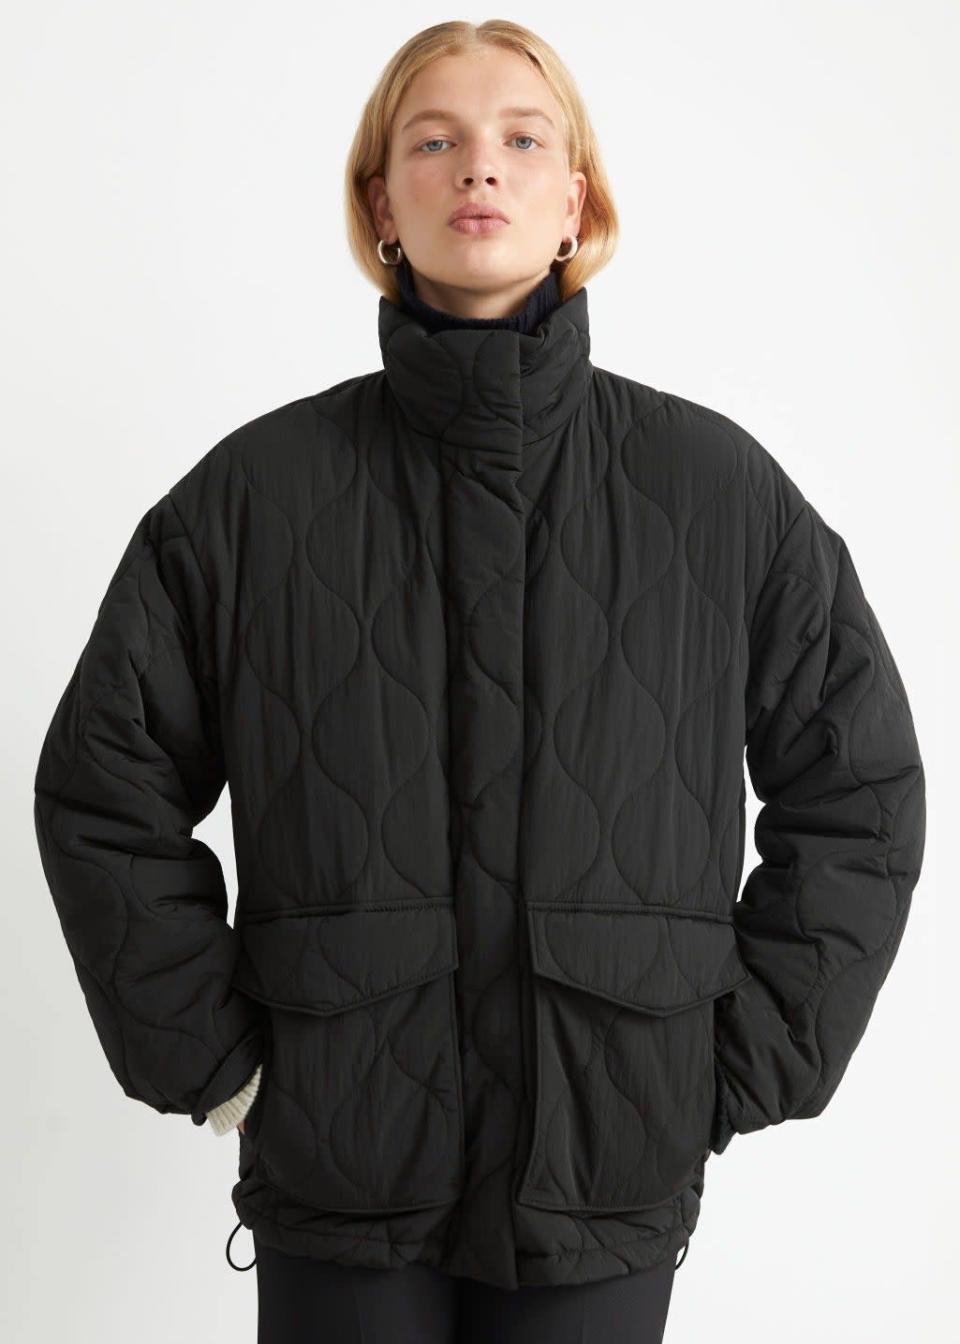 Complete with a high collar (so I wouldn’t need to faff around with a scarf) and big pockets (very useful, obvs), this quilted jacket looks ultra cosy.<br><br><strong>& Other Stories</strong> Quilted Zip Jacket, $, available at <a href="https://www.stories.com/en_gbp/clothing/jackets-coats/jackets/product.quilted-zip-jacket-black.0981077001.html" rel="nofollow noopener" target="_blank" data-ylk="slk:& Other Stories" class="link rapid-noclick-resp">& Other Stories</a>